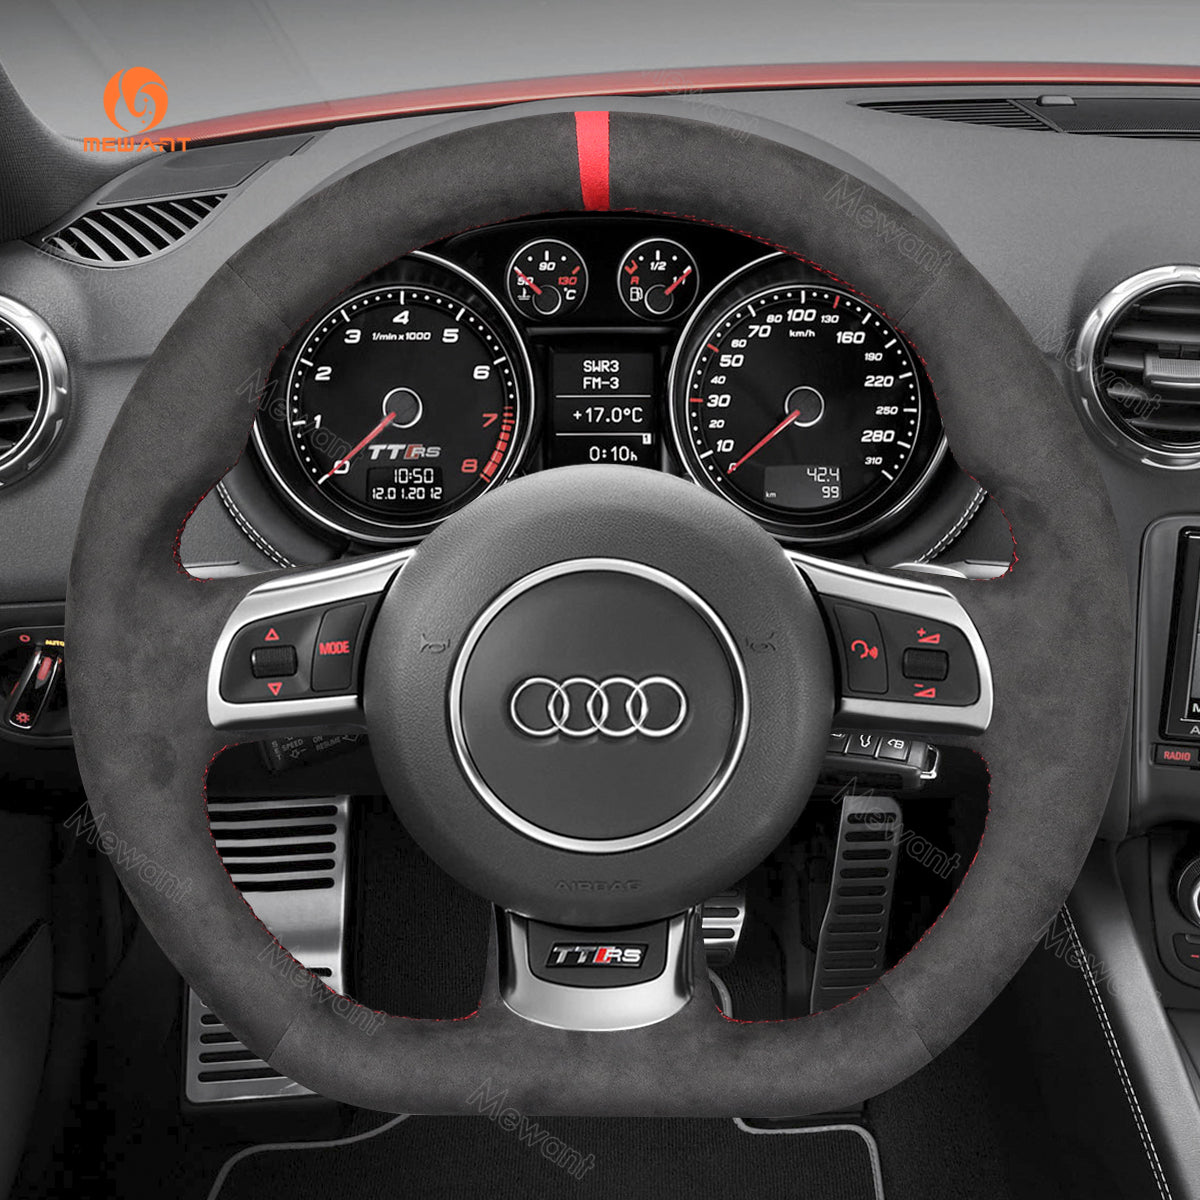 MEWANT Hand Stitch Black Leather Suede Car Steering Wheel Cover for Audi TT RS (8J) / RS 3 (8P) Sportback / RS 6 (C6) Avant / R8 (42)